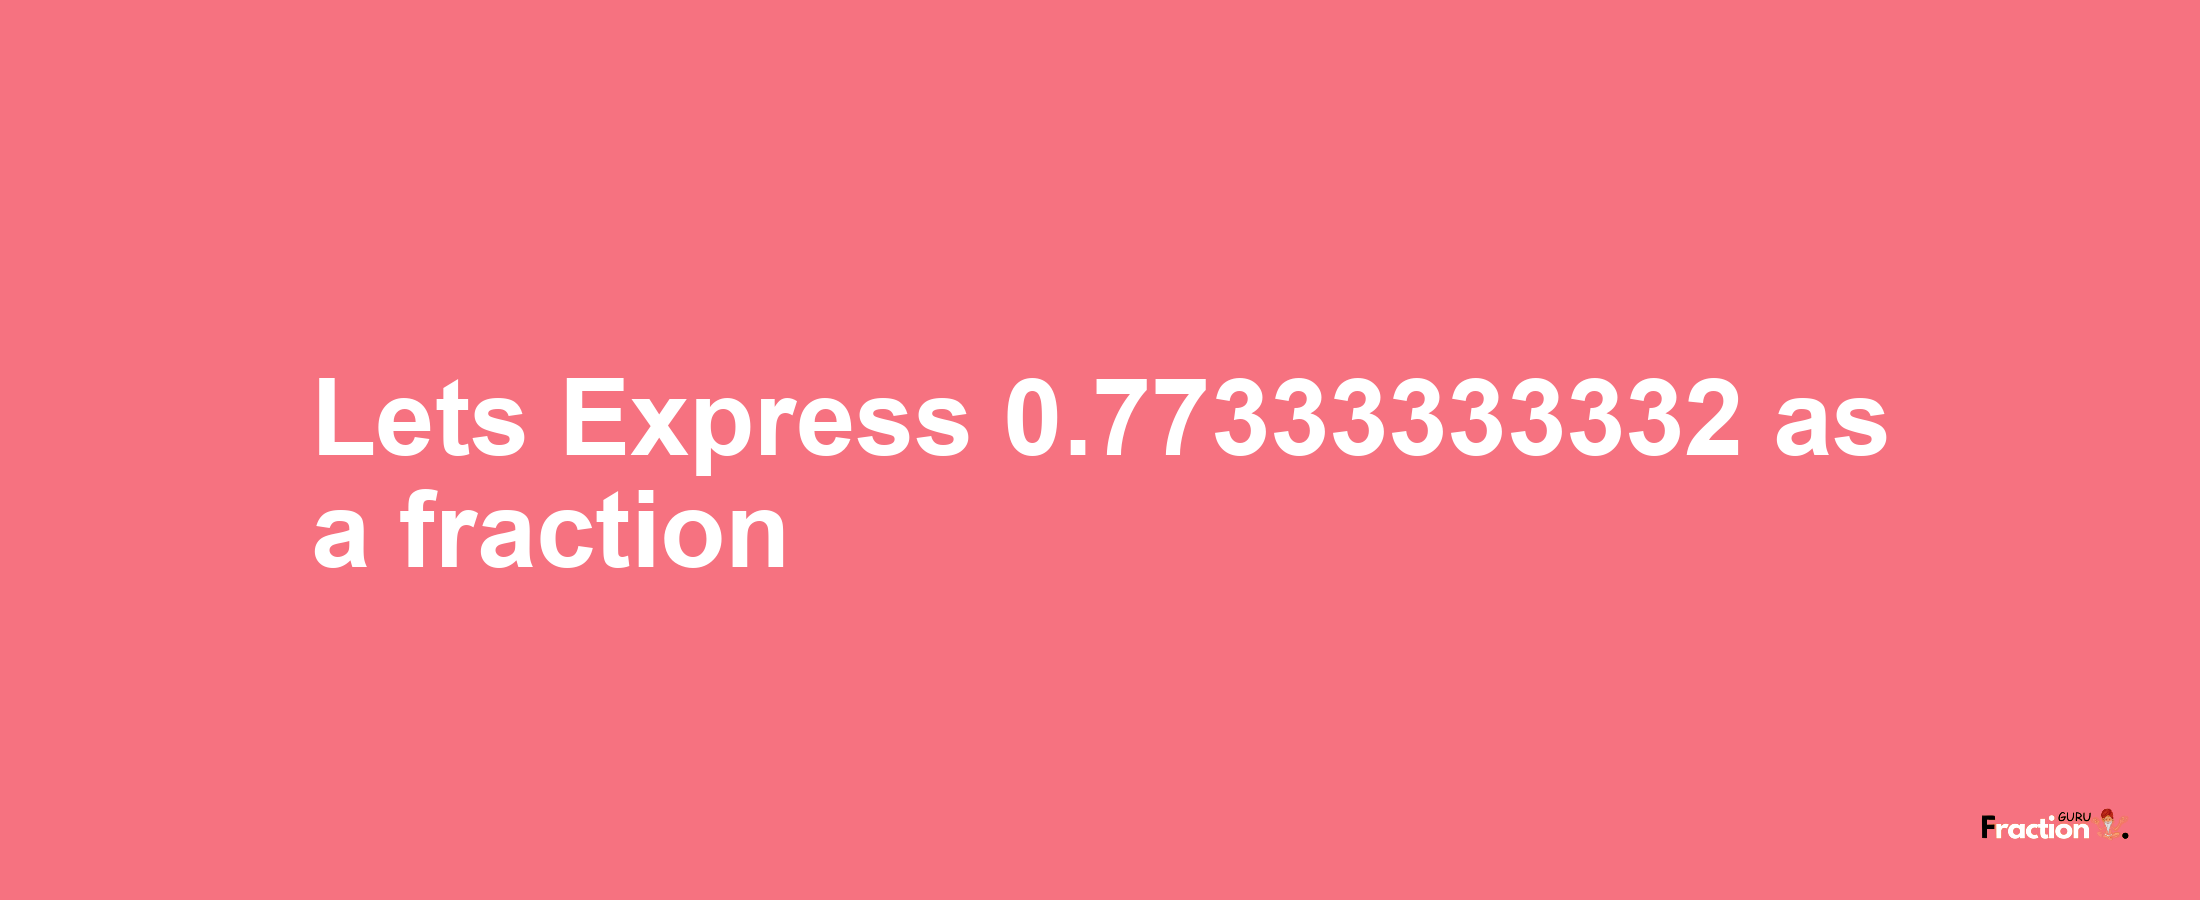 Lets Express 0.77333333332 as afraction